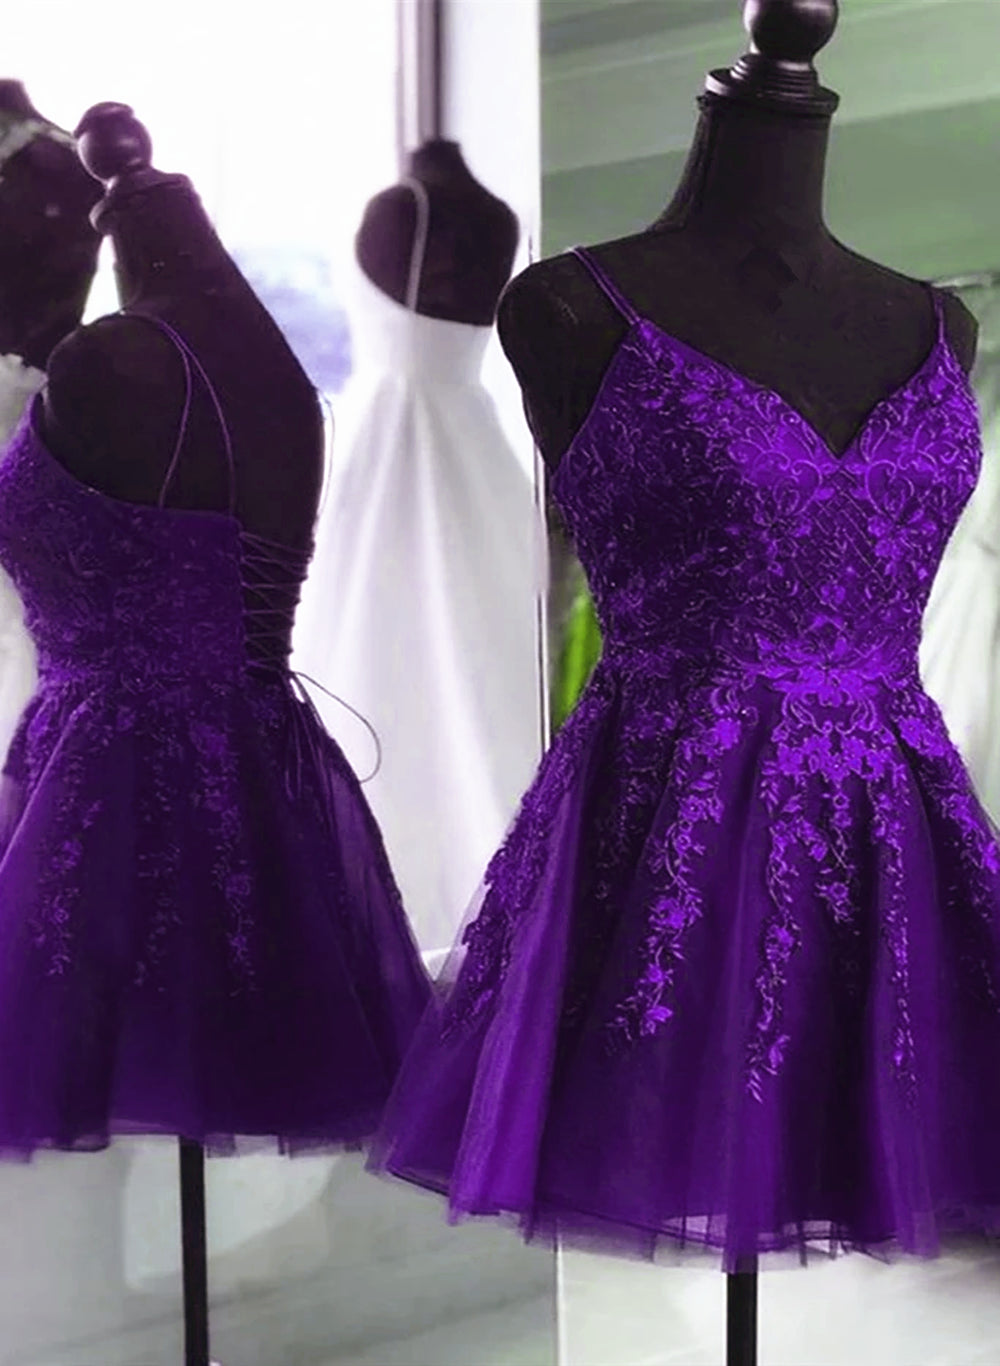 V Neck Beaded Purple Lace Prom Dress Outfits For Girls, Purple Lace Homecoming Dress Outfits For Women Short Party Dress